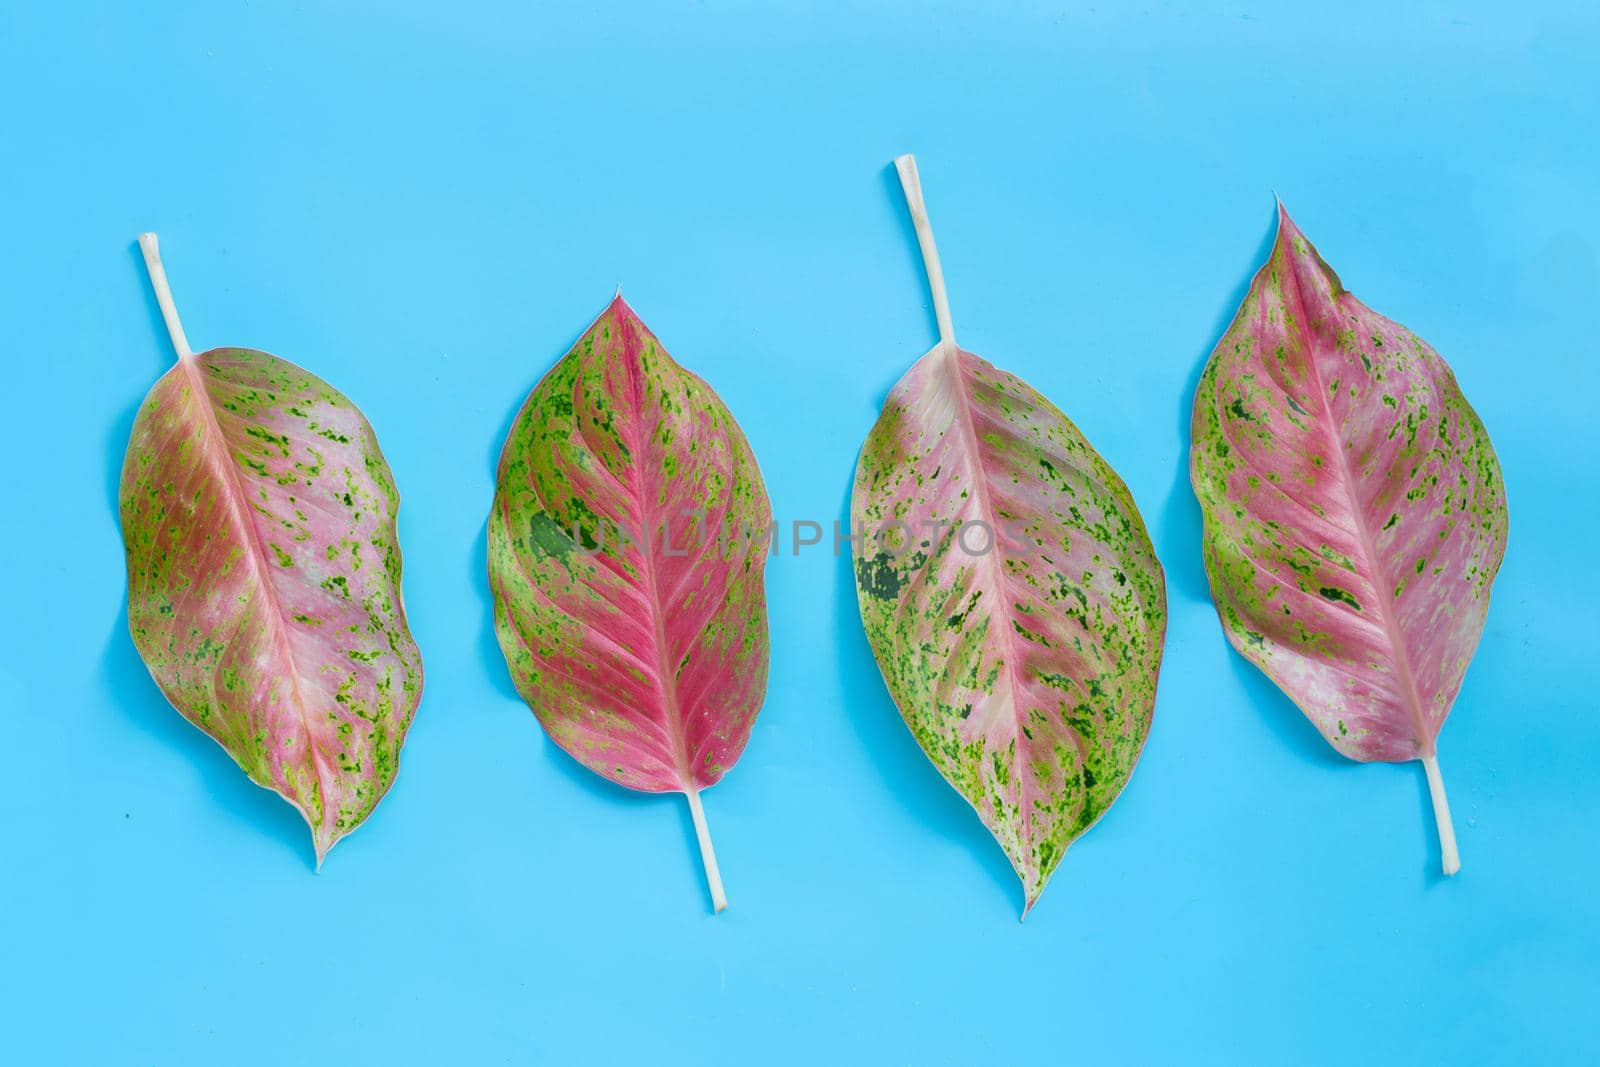 Colorful aglaonema leaves on blue background.